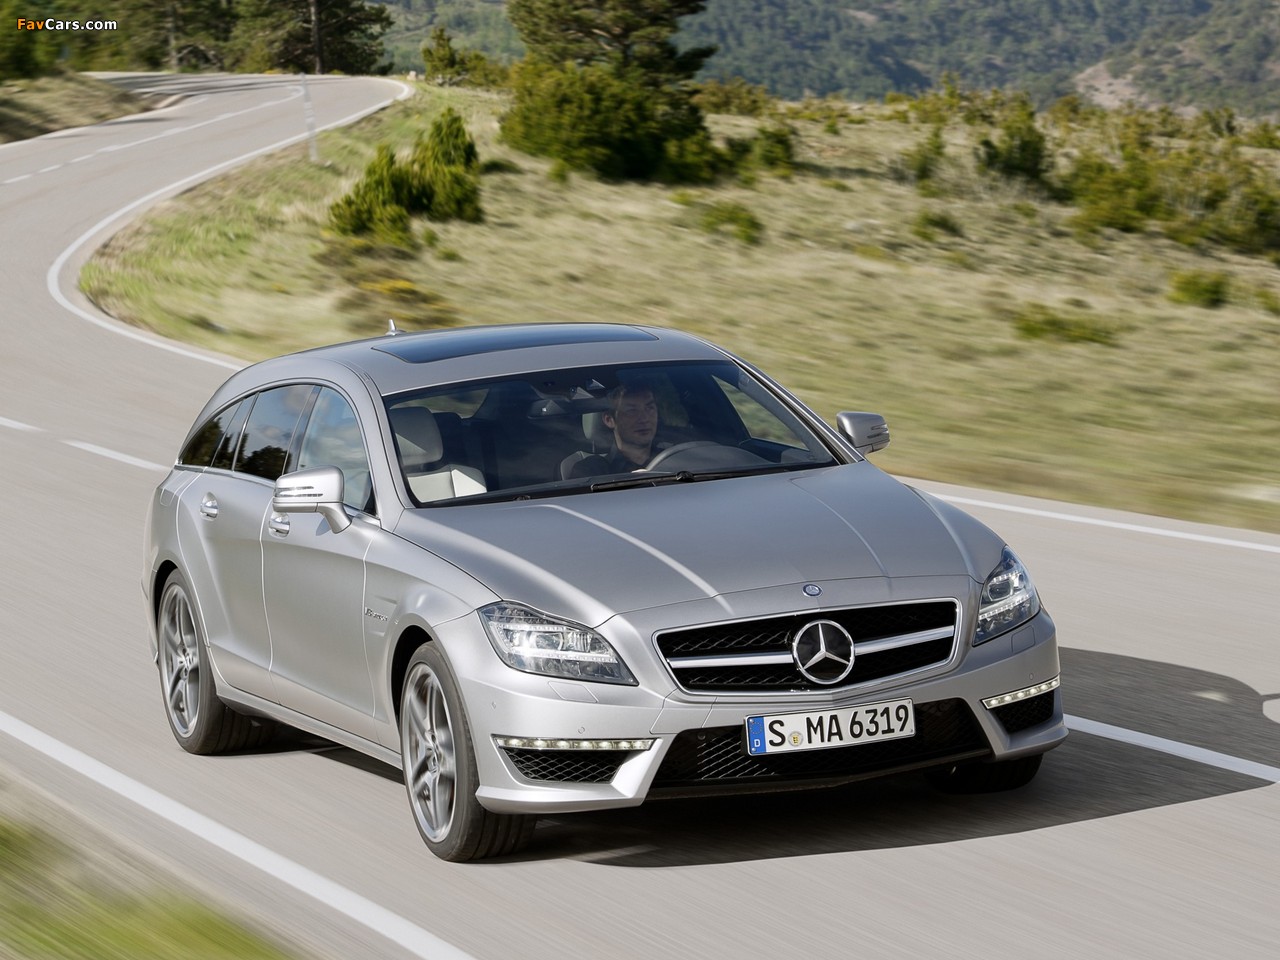 Mercedes-Benz CLS 63 AMG Shooting Brake (X218) 2012 pictures (1280 x 960)